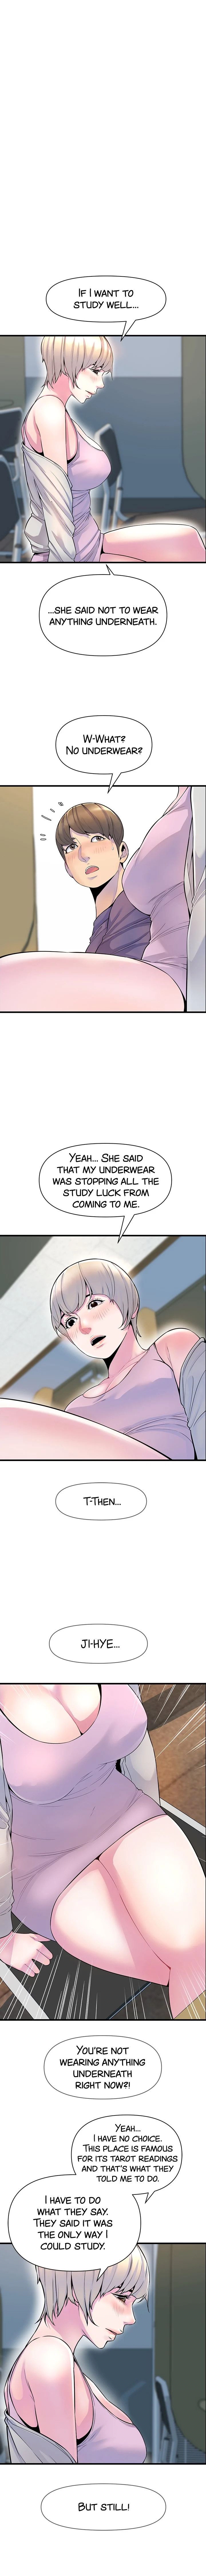 Study Dates - Chapter 26 Page 3